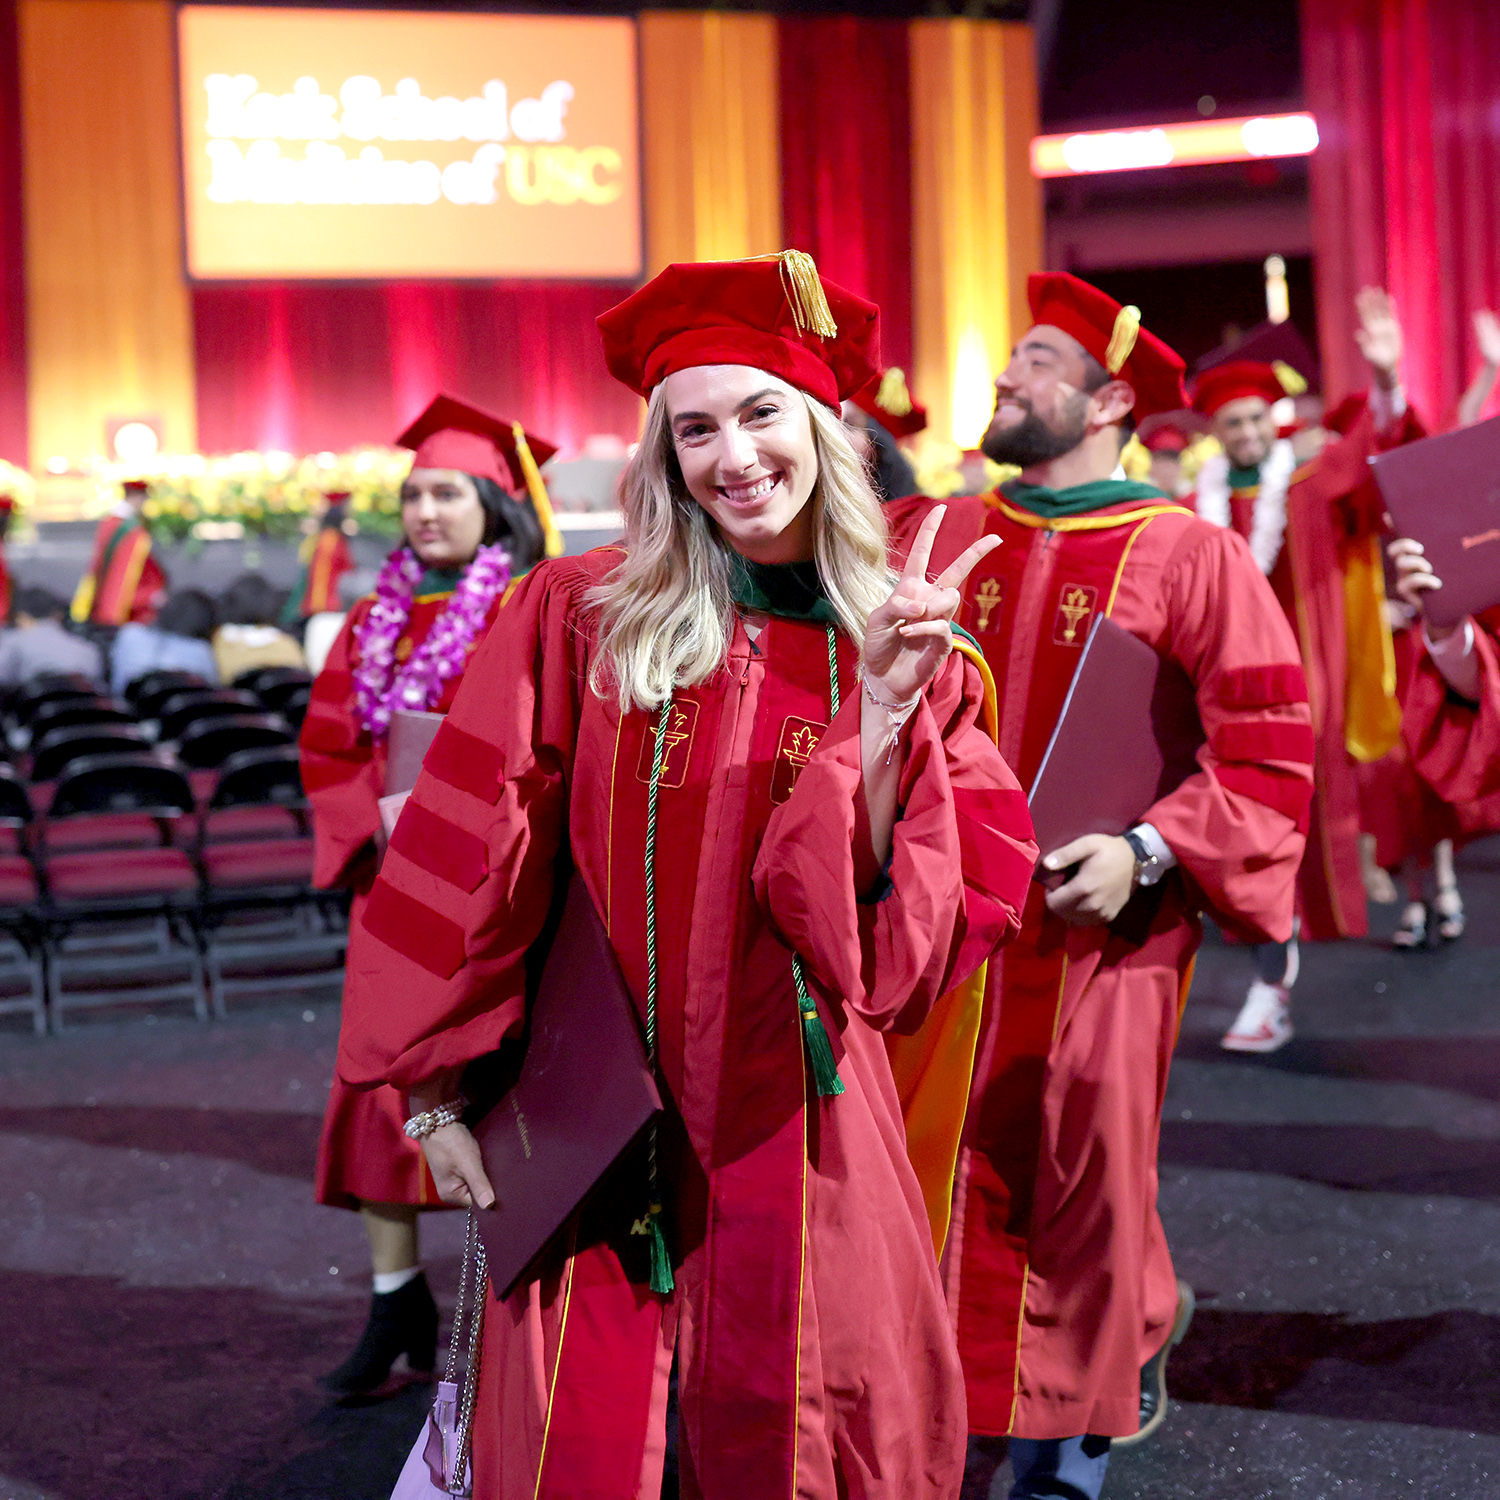 Image of MD student at commencement ceremony